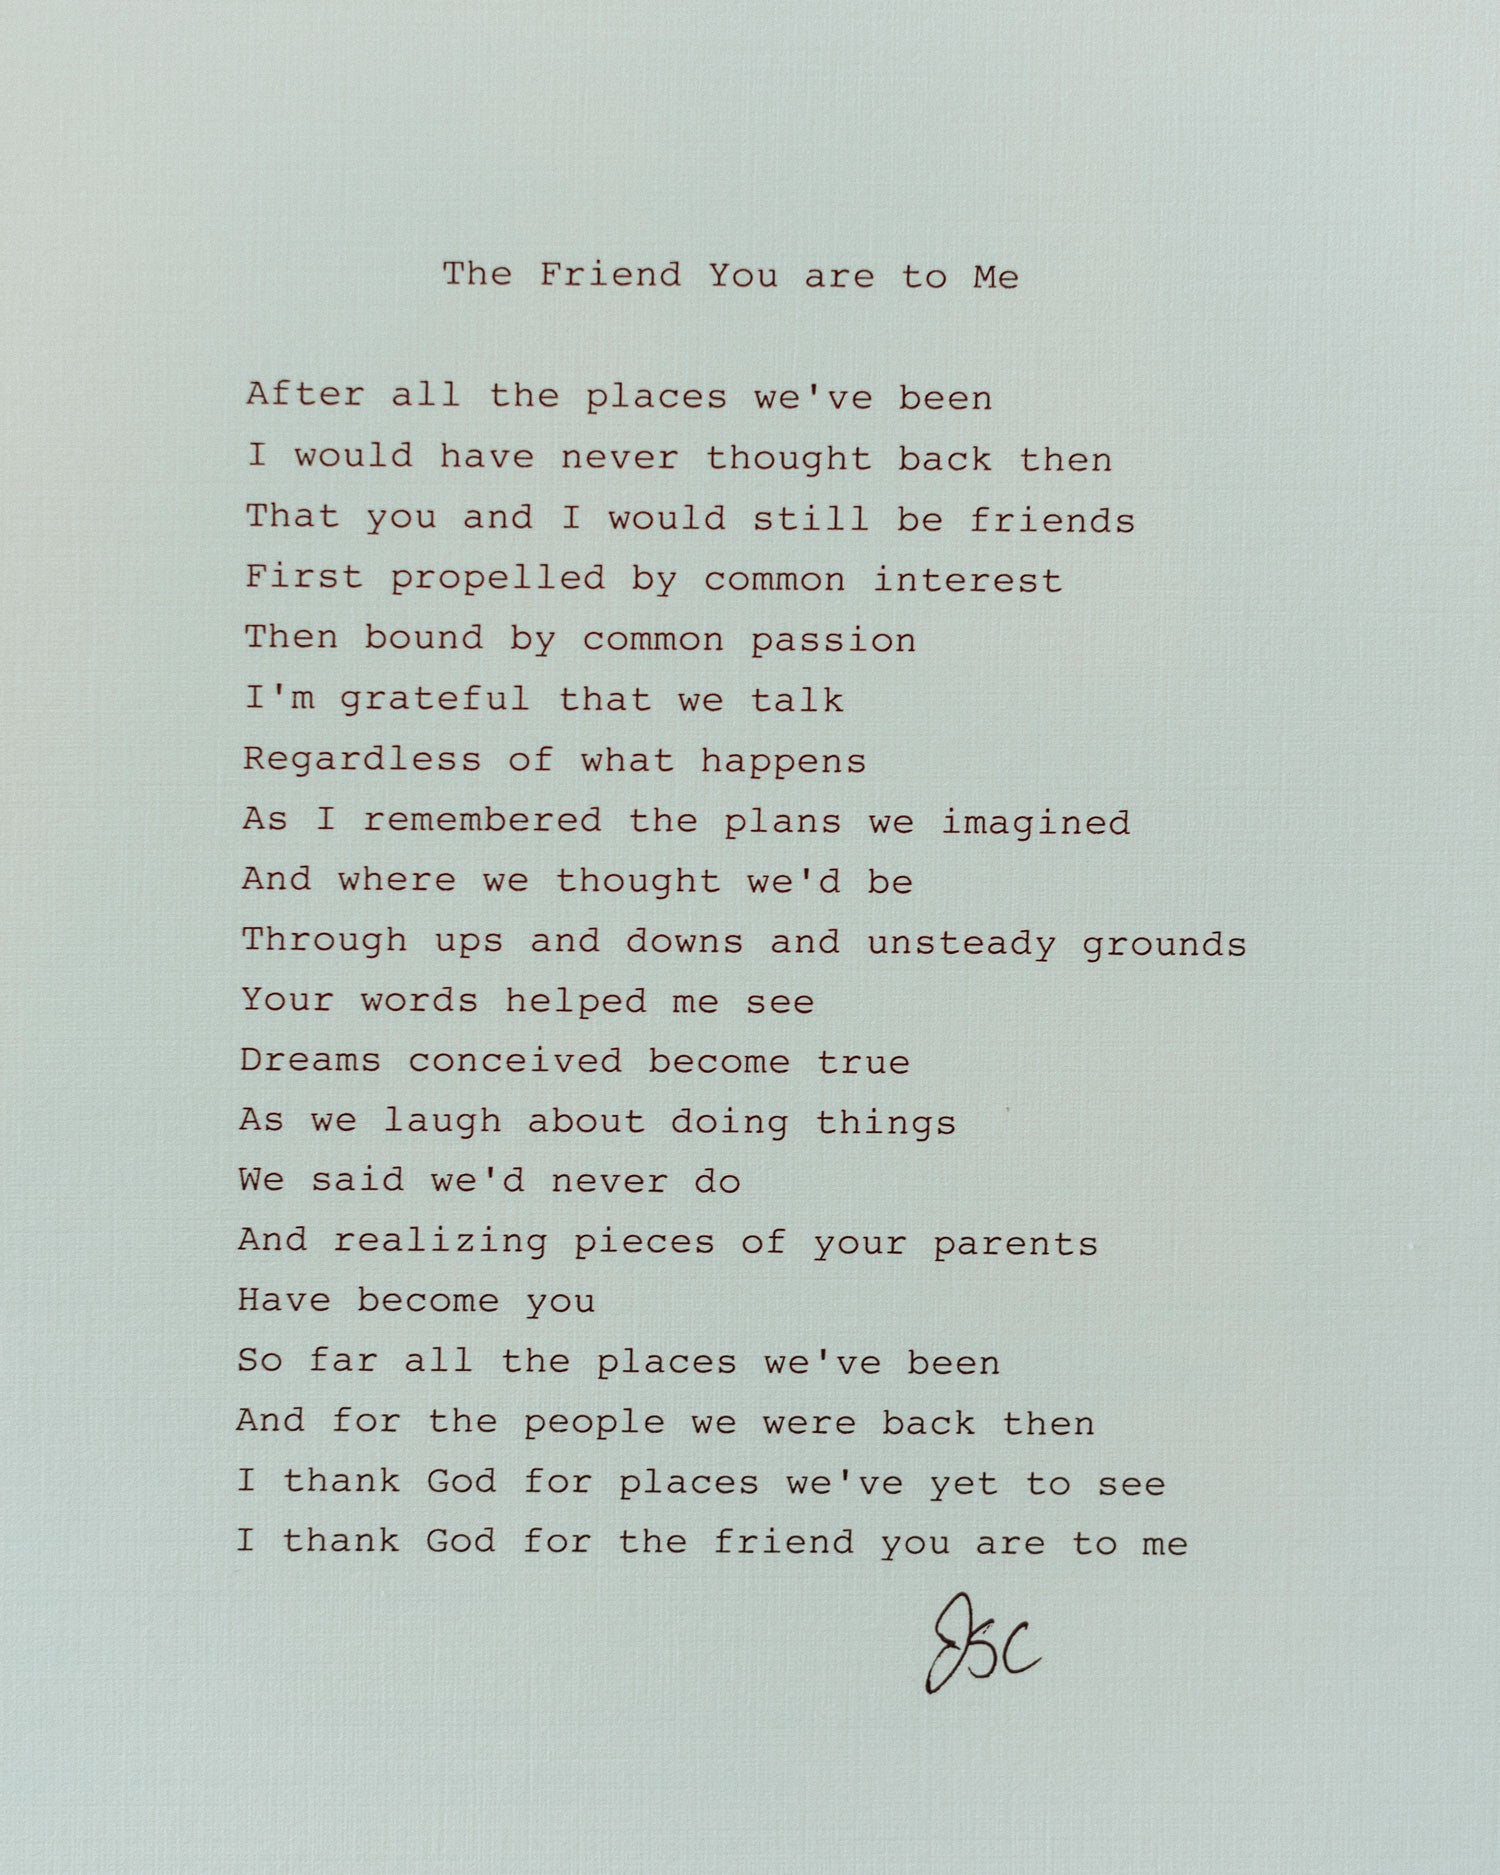 "The Friend You are to Me" Poem